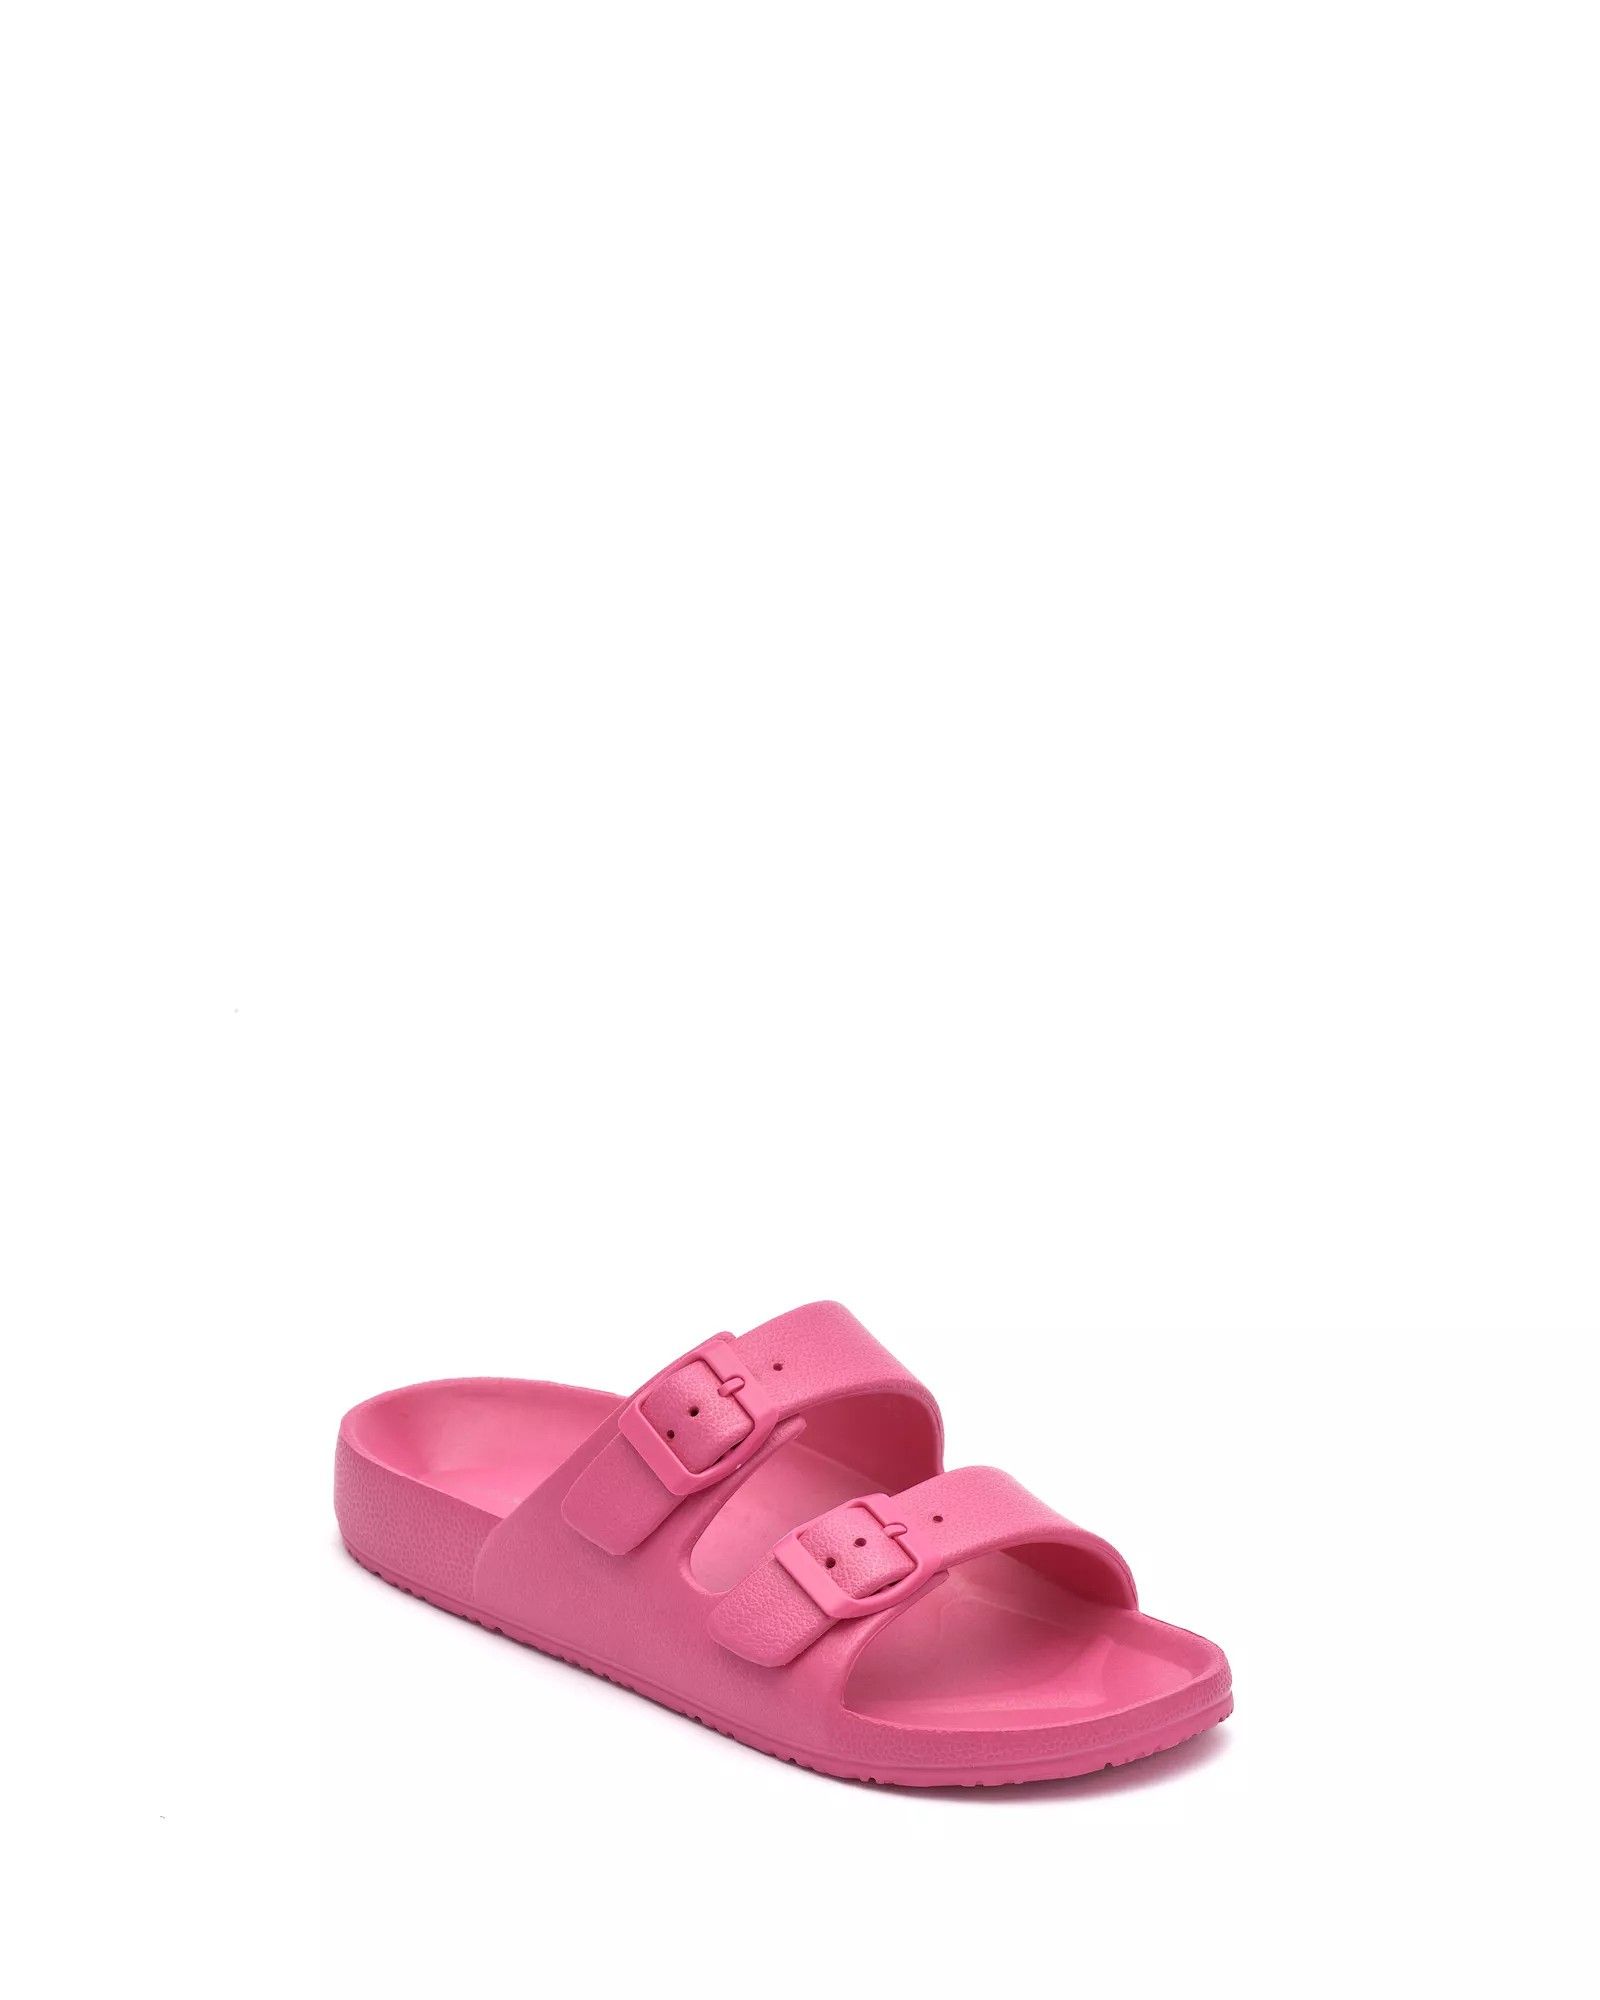 Mandial Two-Strap Slide | Vince Camuto